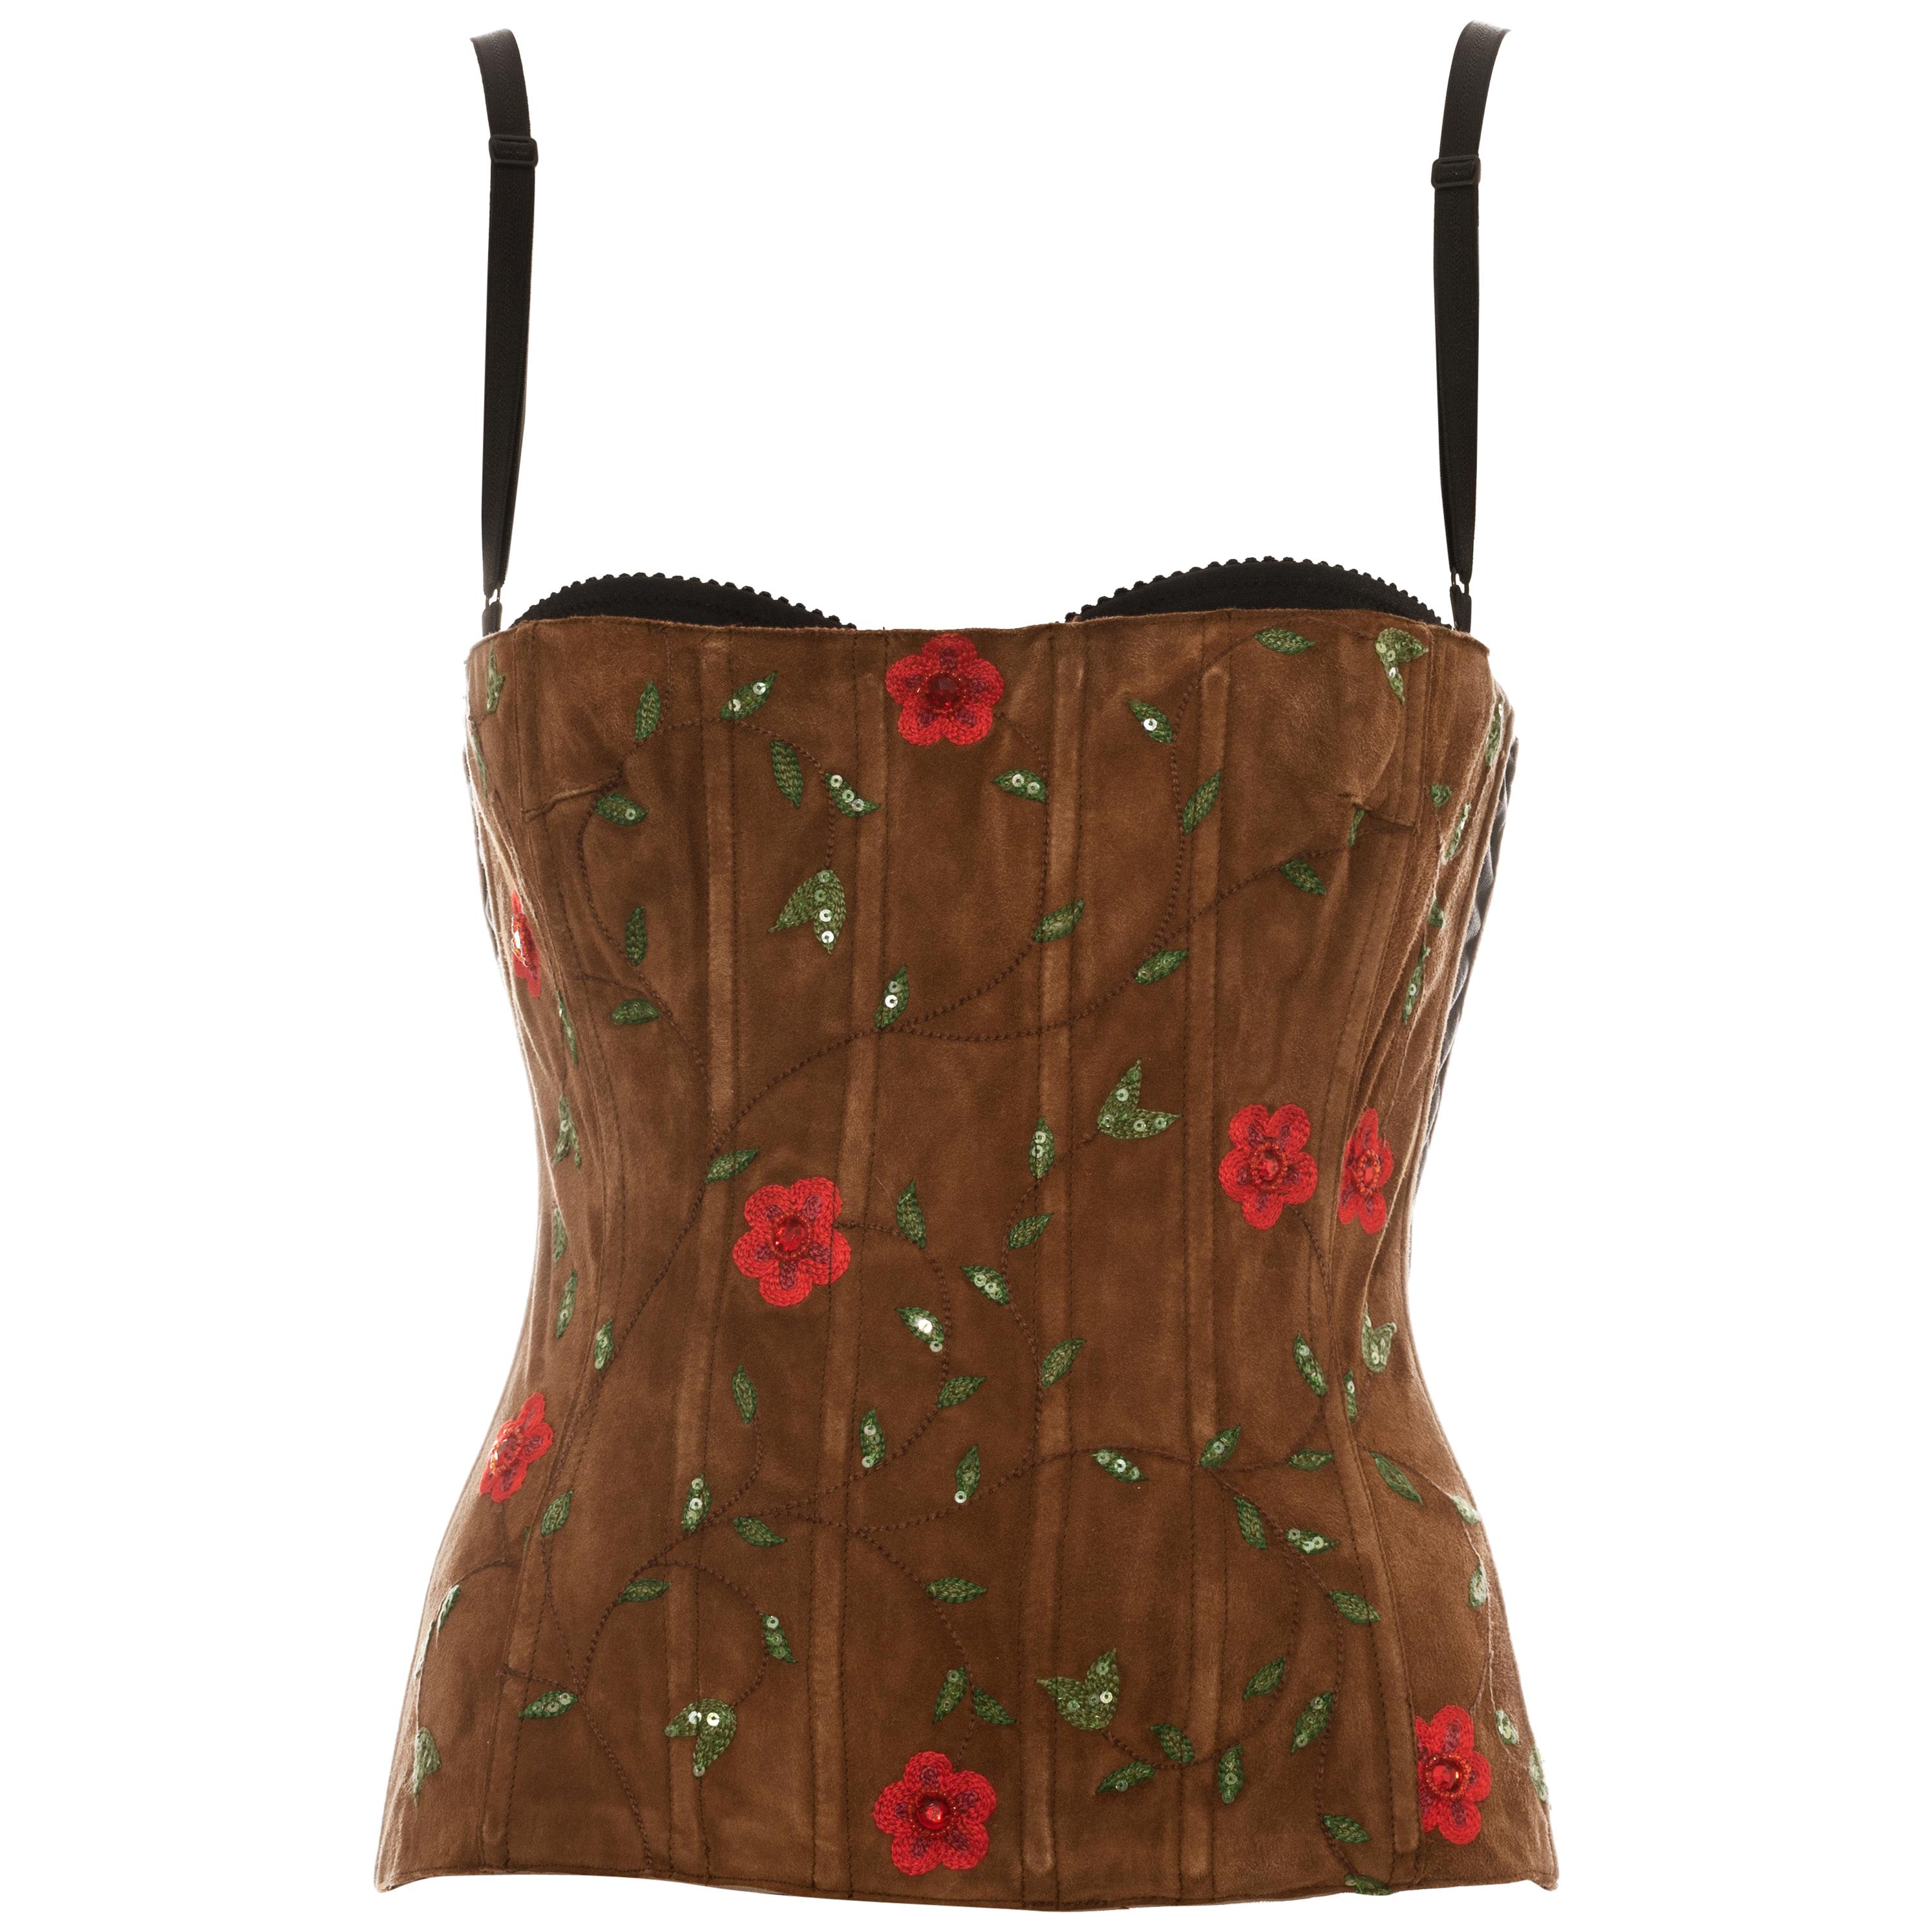 Dolce & Gabbana brown suede embellished corset, 1990s